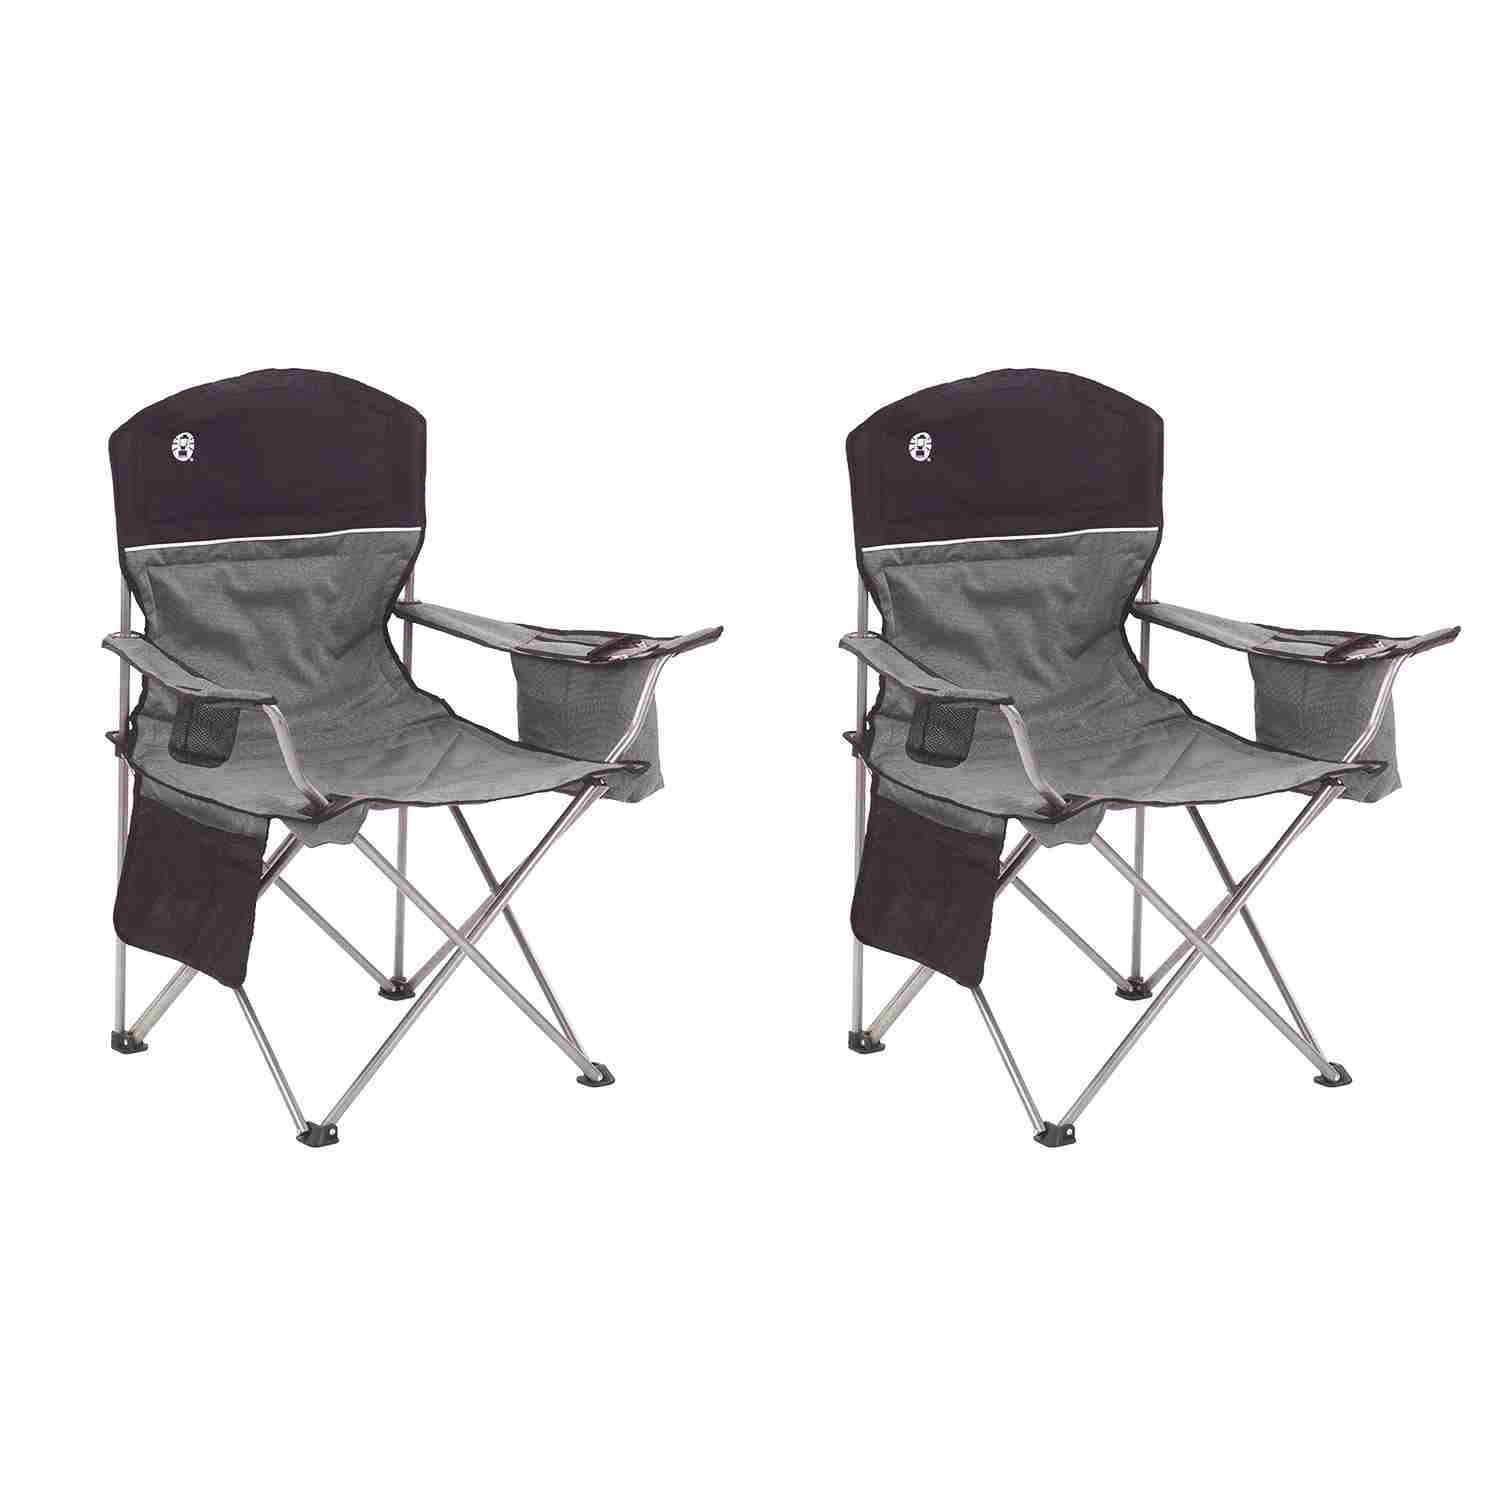 oversized-black-coleman-chairs-camping